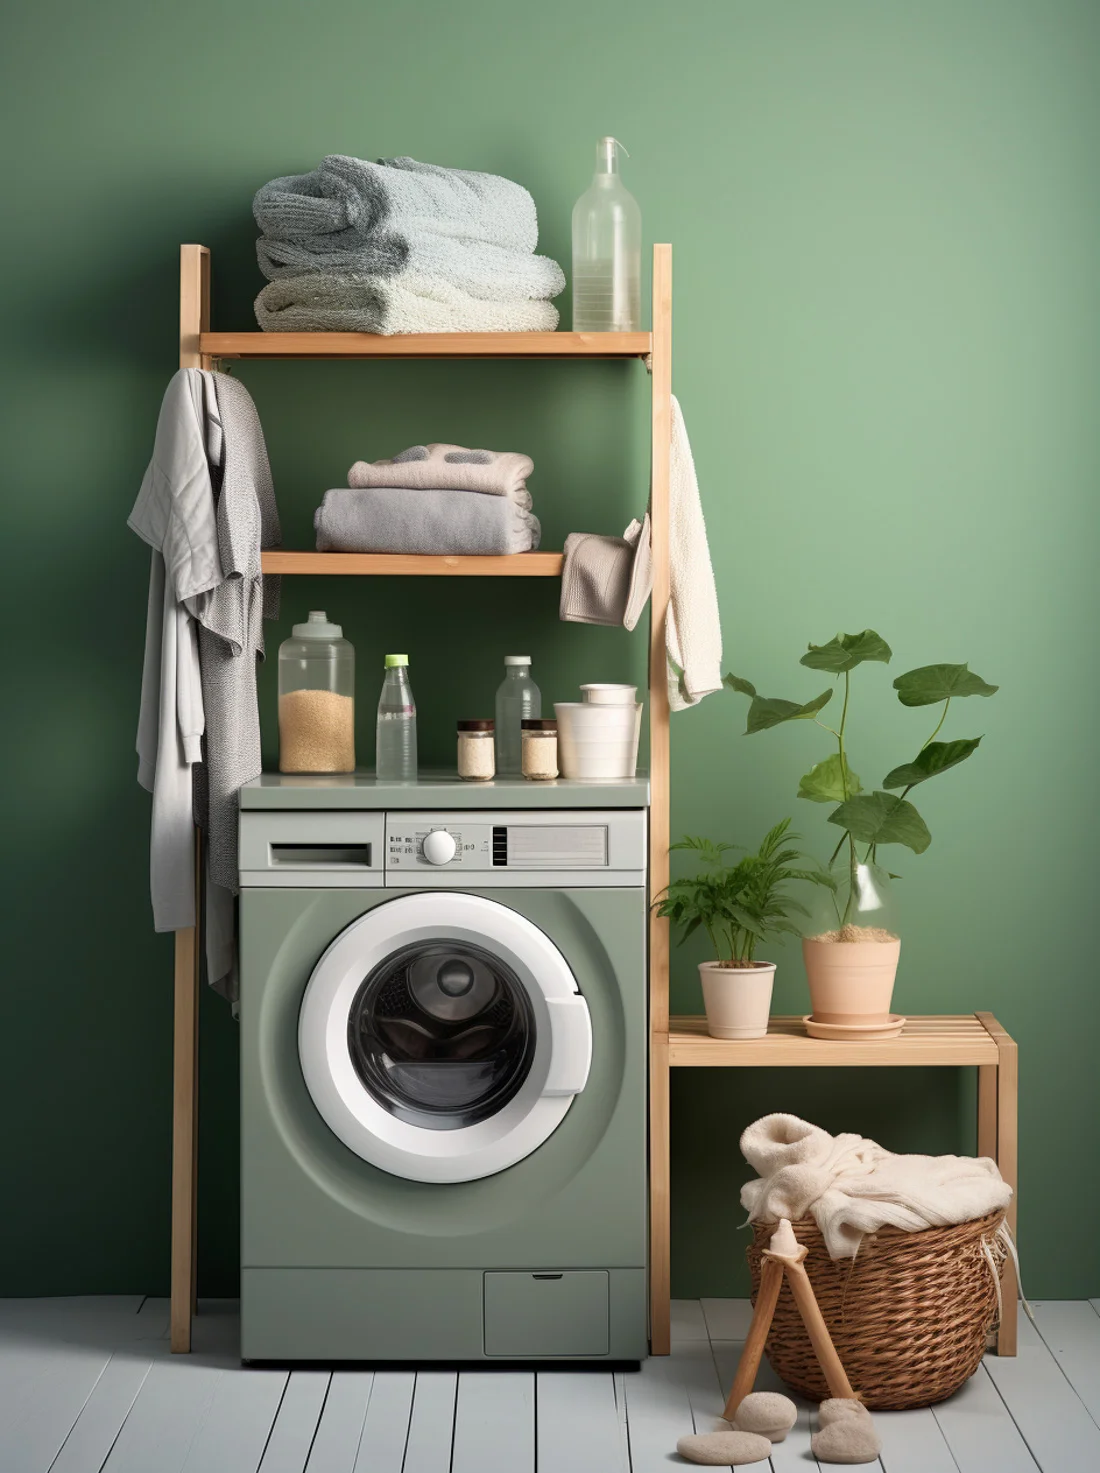 freestanding wood shelving unit over washing machine, green wall and green washer